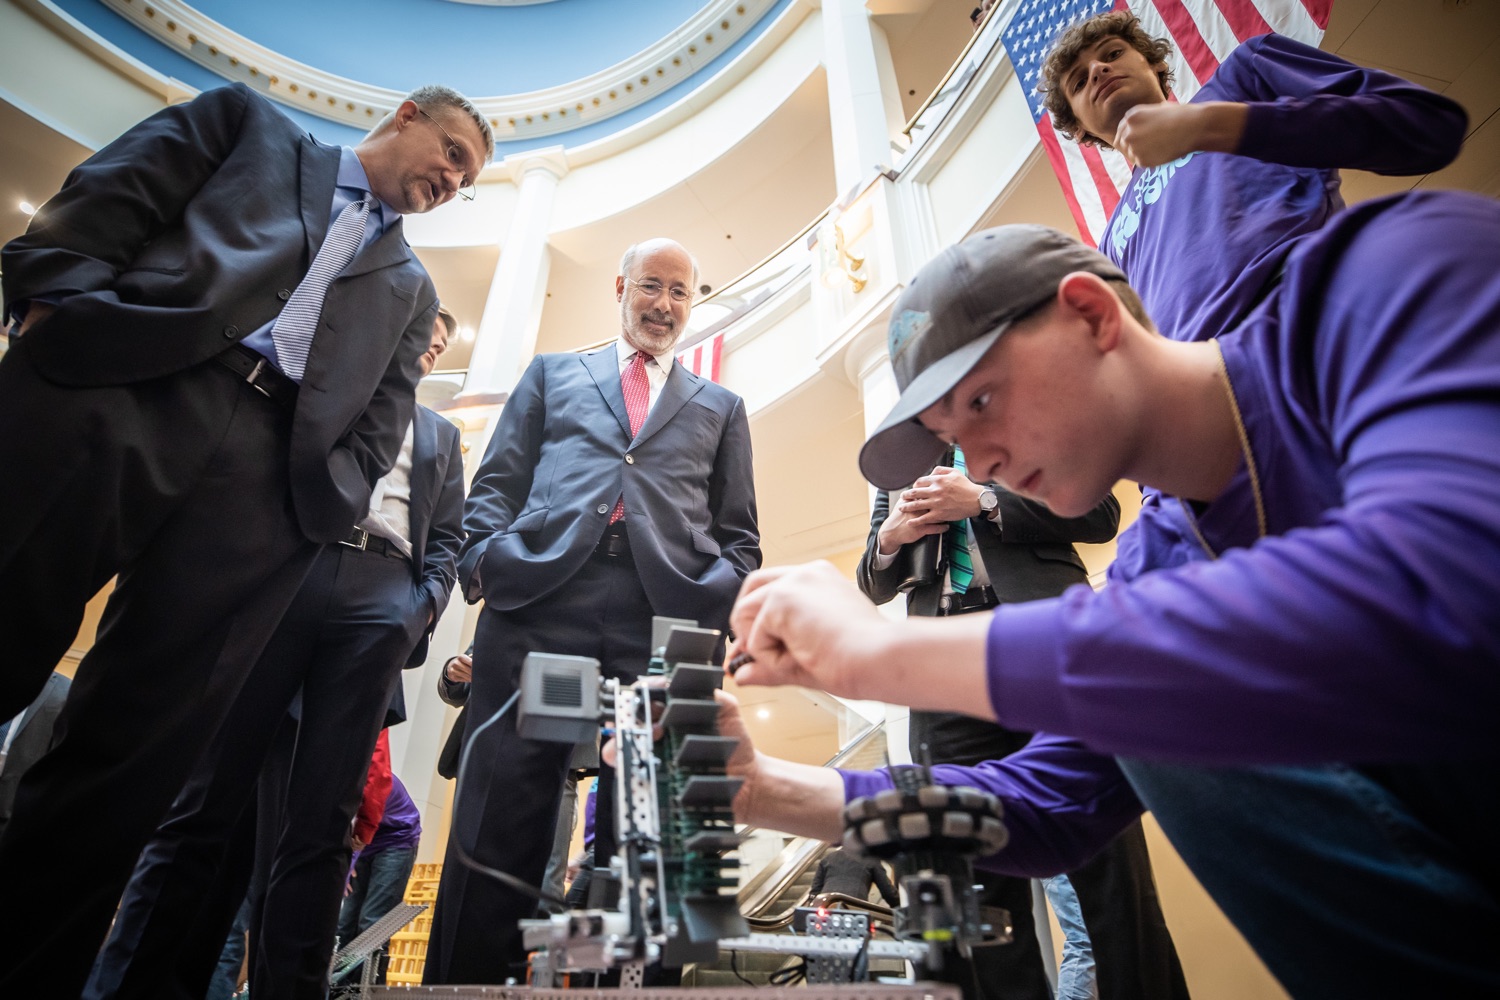 Pennsylvania Governor Tom Wolf meeting with students at the robotics demonstration.Celebrating the success of the PAsmart workforce development program to create educational opportunities at schools across the commonwealth, Governor Tom Wolf welcomed more than 50 students from the Pennsylvania Rural Robotics Initiative to the Capitol today. The students from nine western Pennsylvania school districts showcased their skills in coding, robotics and drone technology. The Wolf administration awarded the initiative a $299,000 PAsmart Advancing Grant earlier this year. Harrisburg, PA  Tuesday, November 12, 2019<br><a href="https://filesource.amperwave.net/commonwealthofpa/photo/17587_gov_pasmart_rural_robotics_dz_014.jpg" target="_blank">⇣ Download Photo</a>